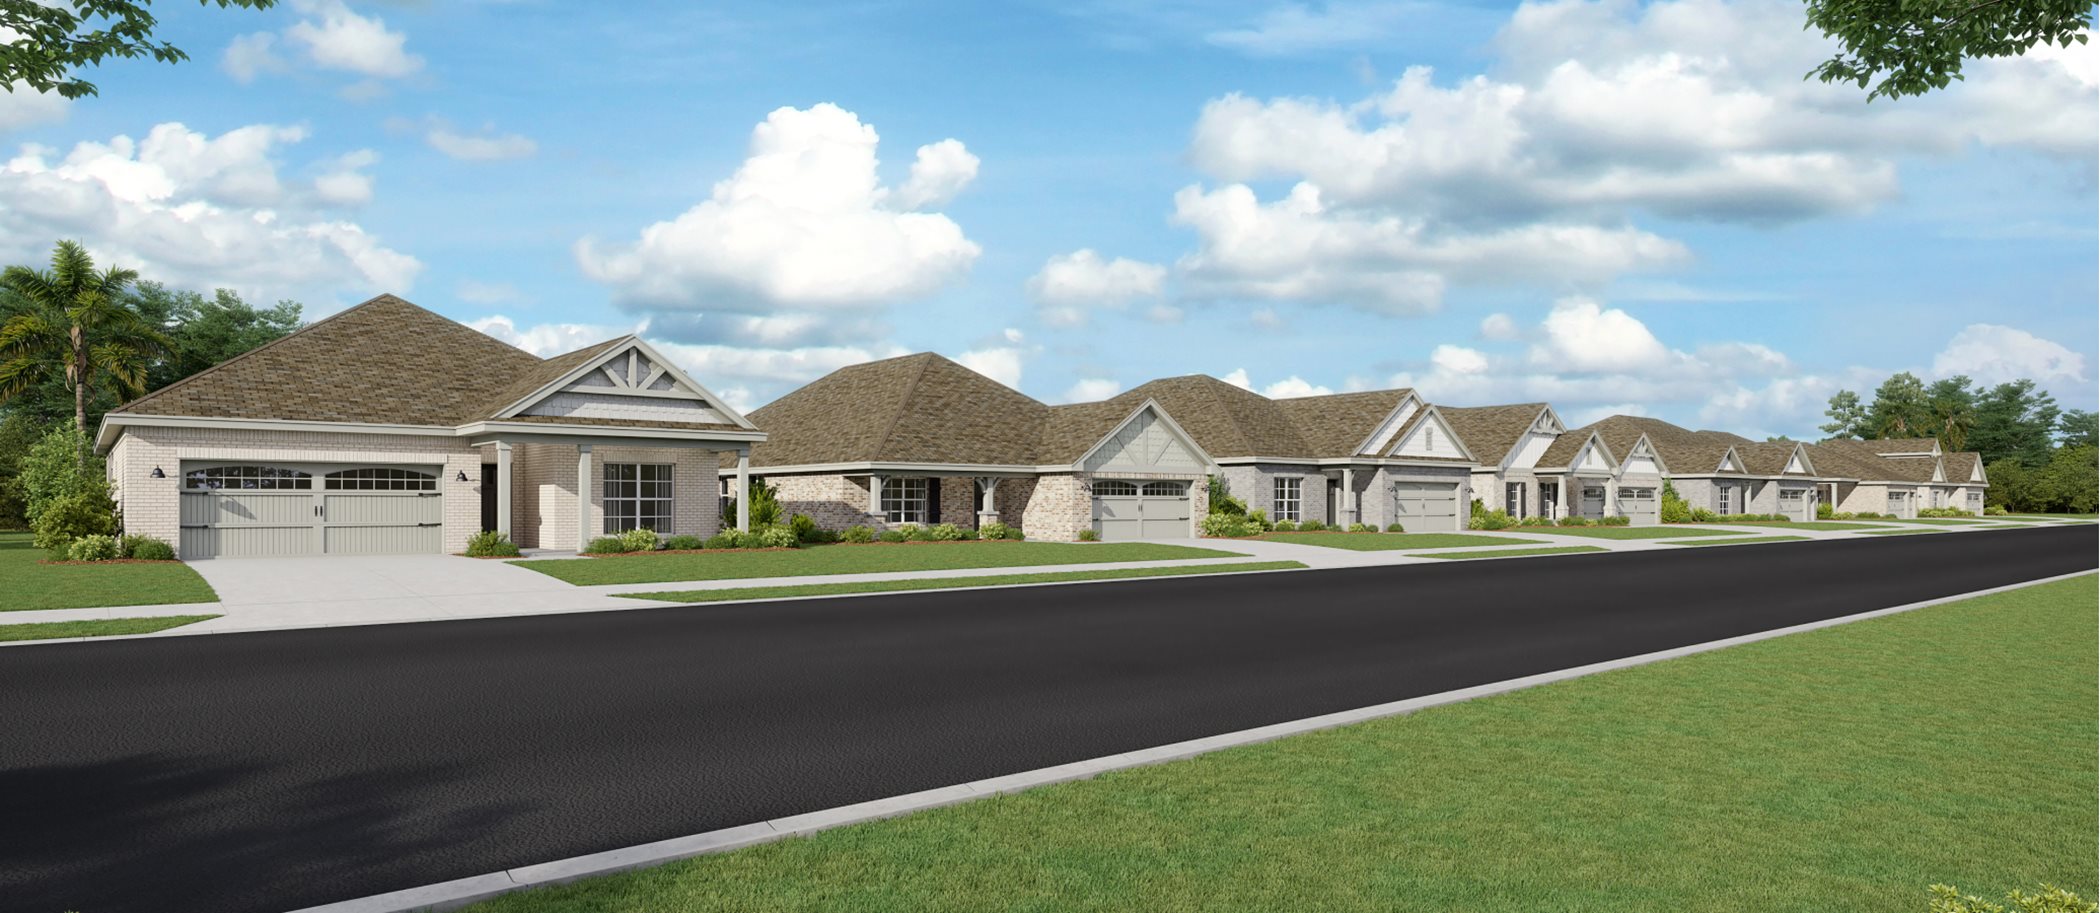 Street view of Ranchers collection homes